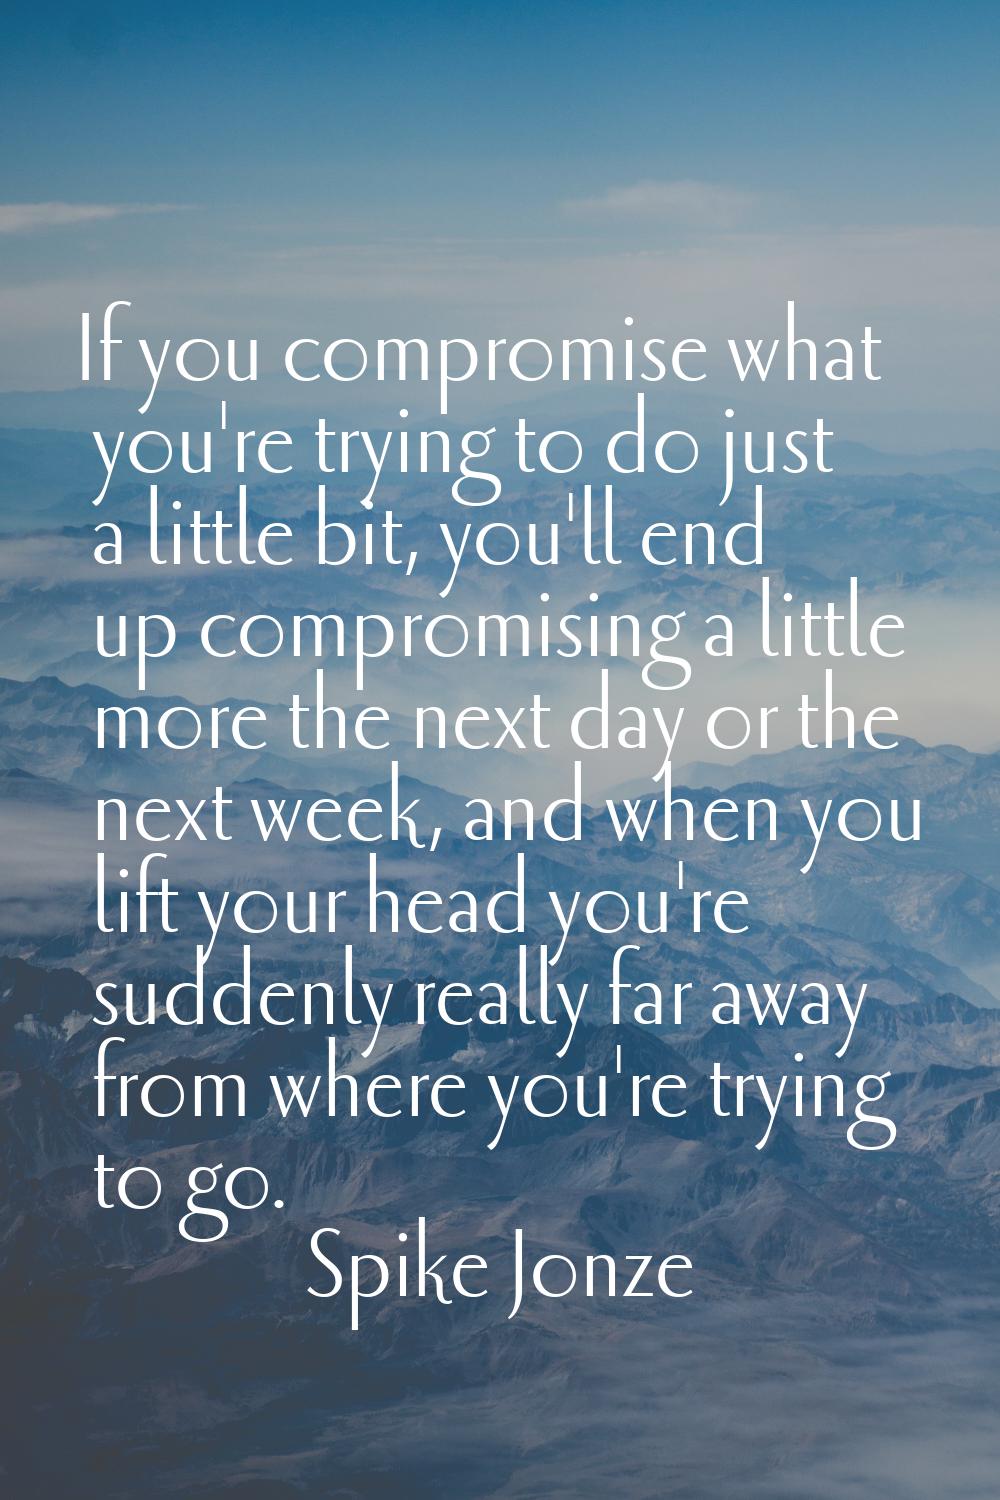 If you compromise what you're trying to do just a little bit, you'll end up compromising a little m